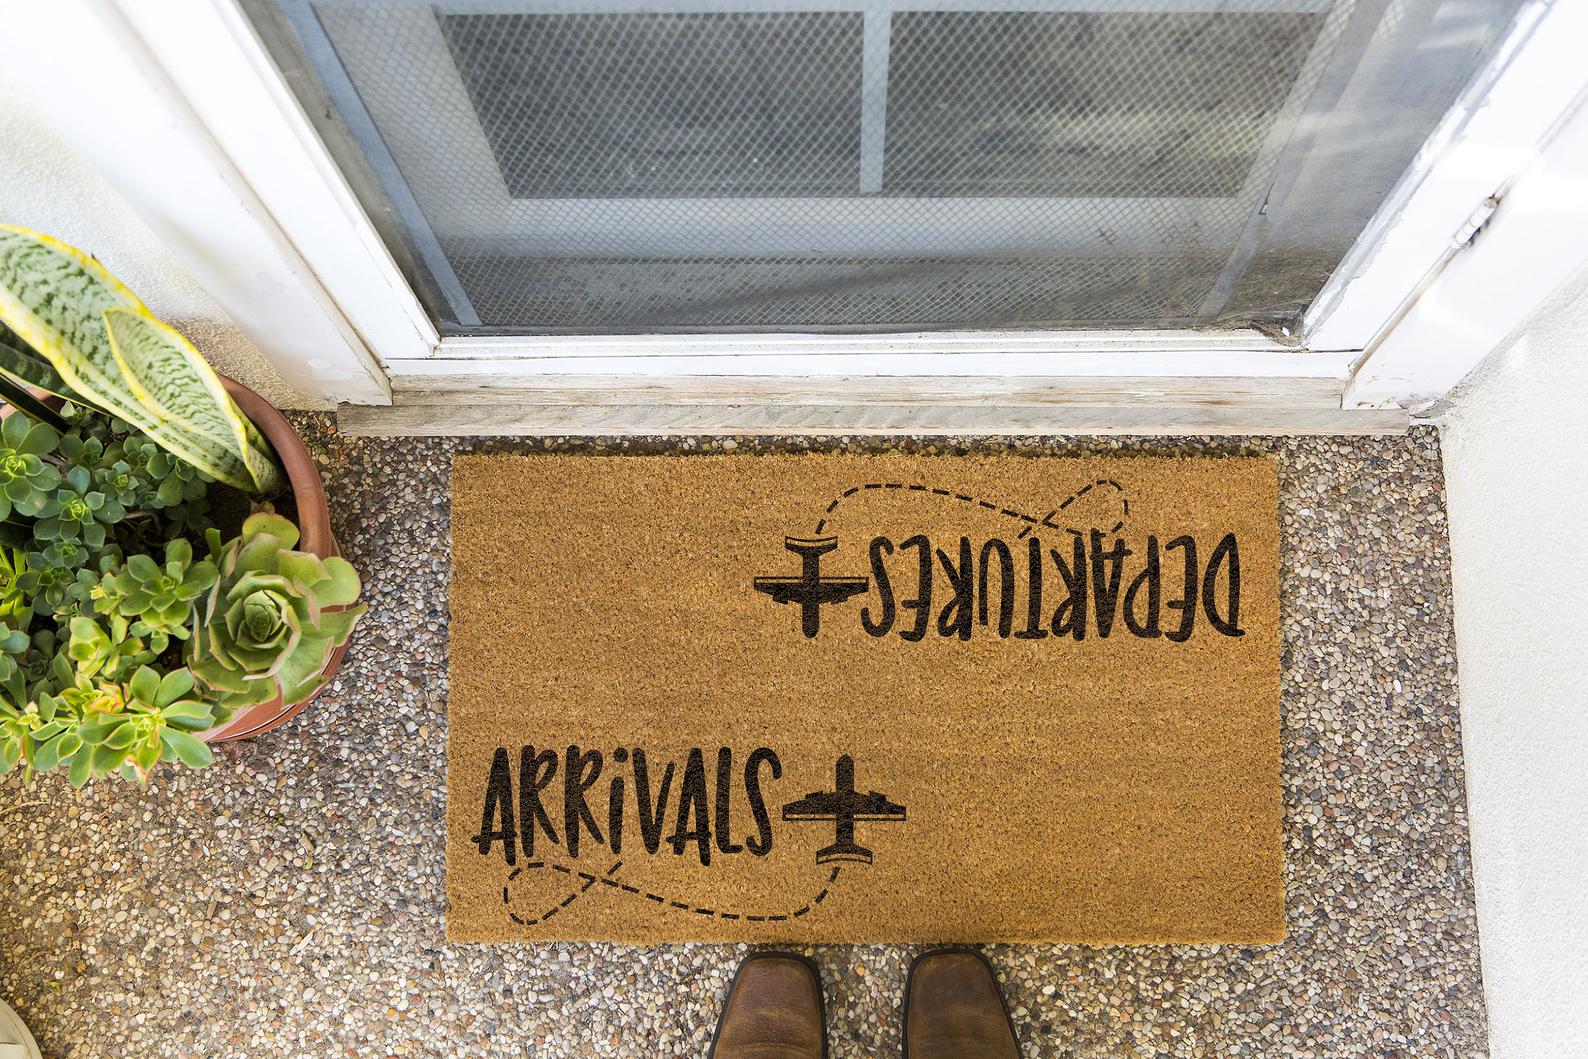 arrivals, departure doormat, aviation themed home decor, aviation themed gifts, travel themed gifts, gifts for flight attendants, gifts for pilots